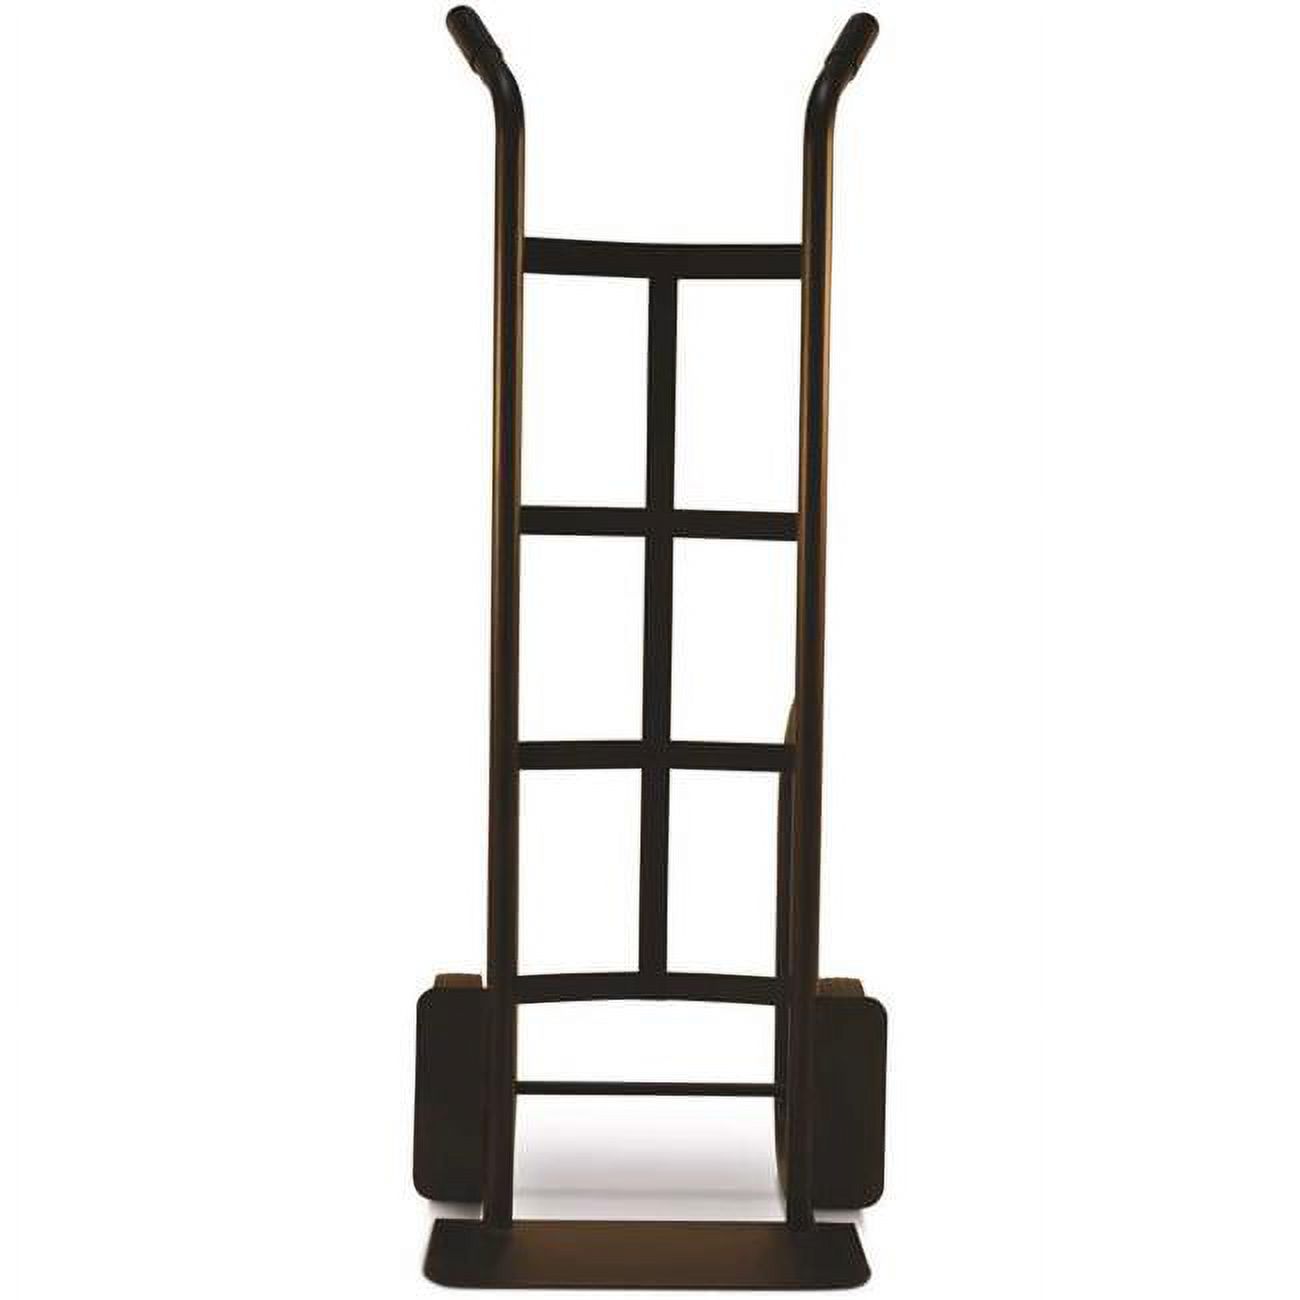 Milwaukee Hand Truck  1000 lbs Heavy Duty Dual Handle Truck with 10 in. Solid Punture Proof Tire, Black - image 1 of 1